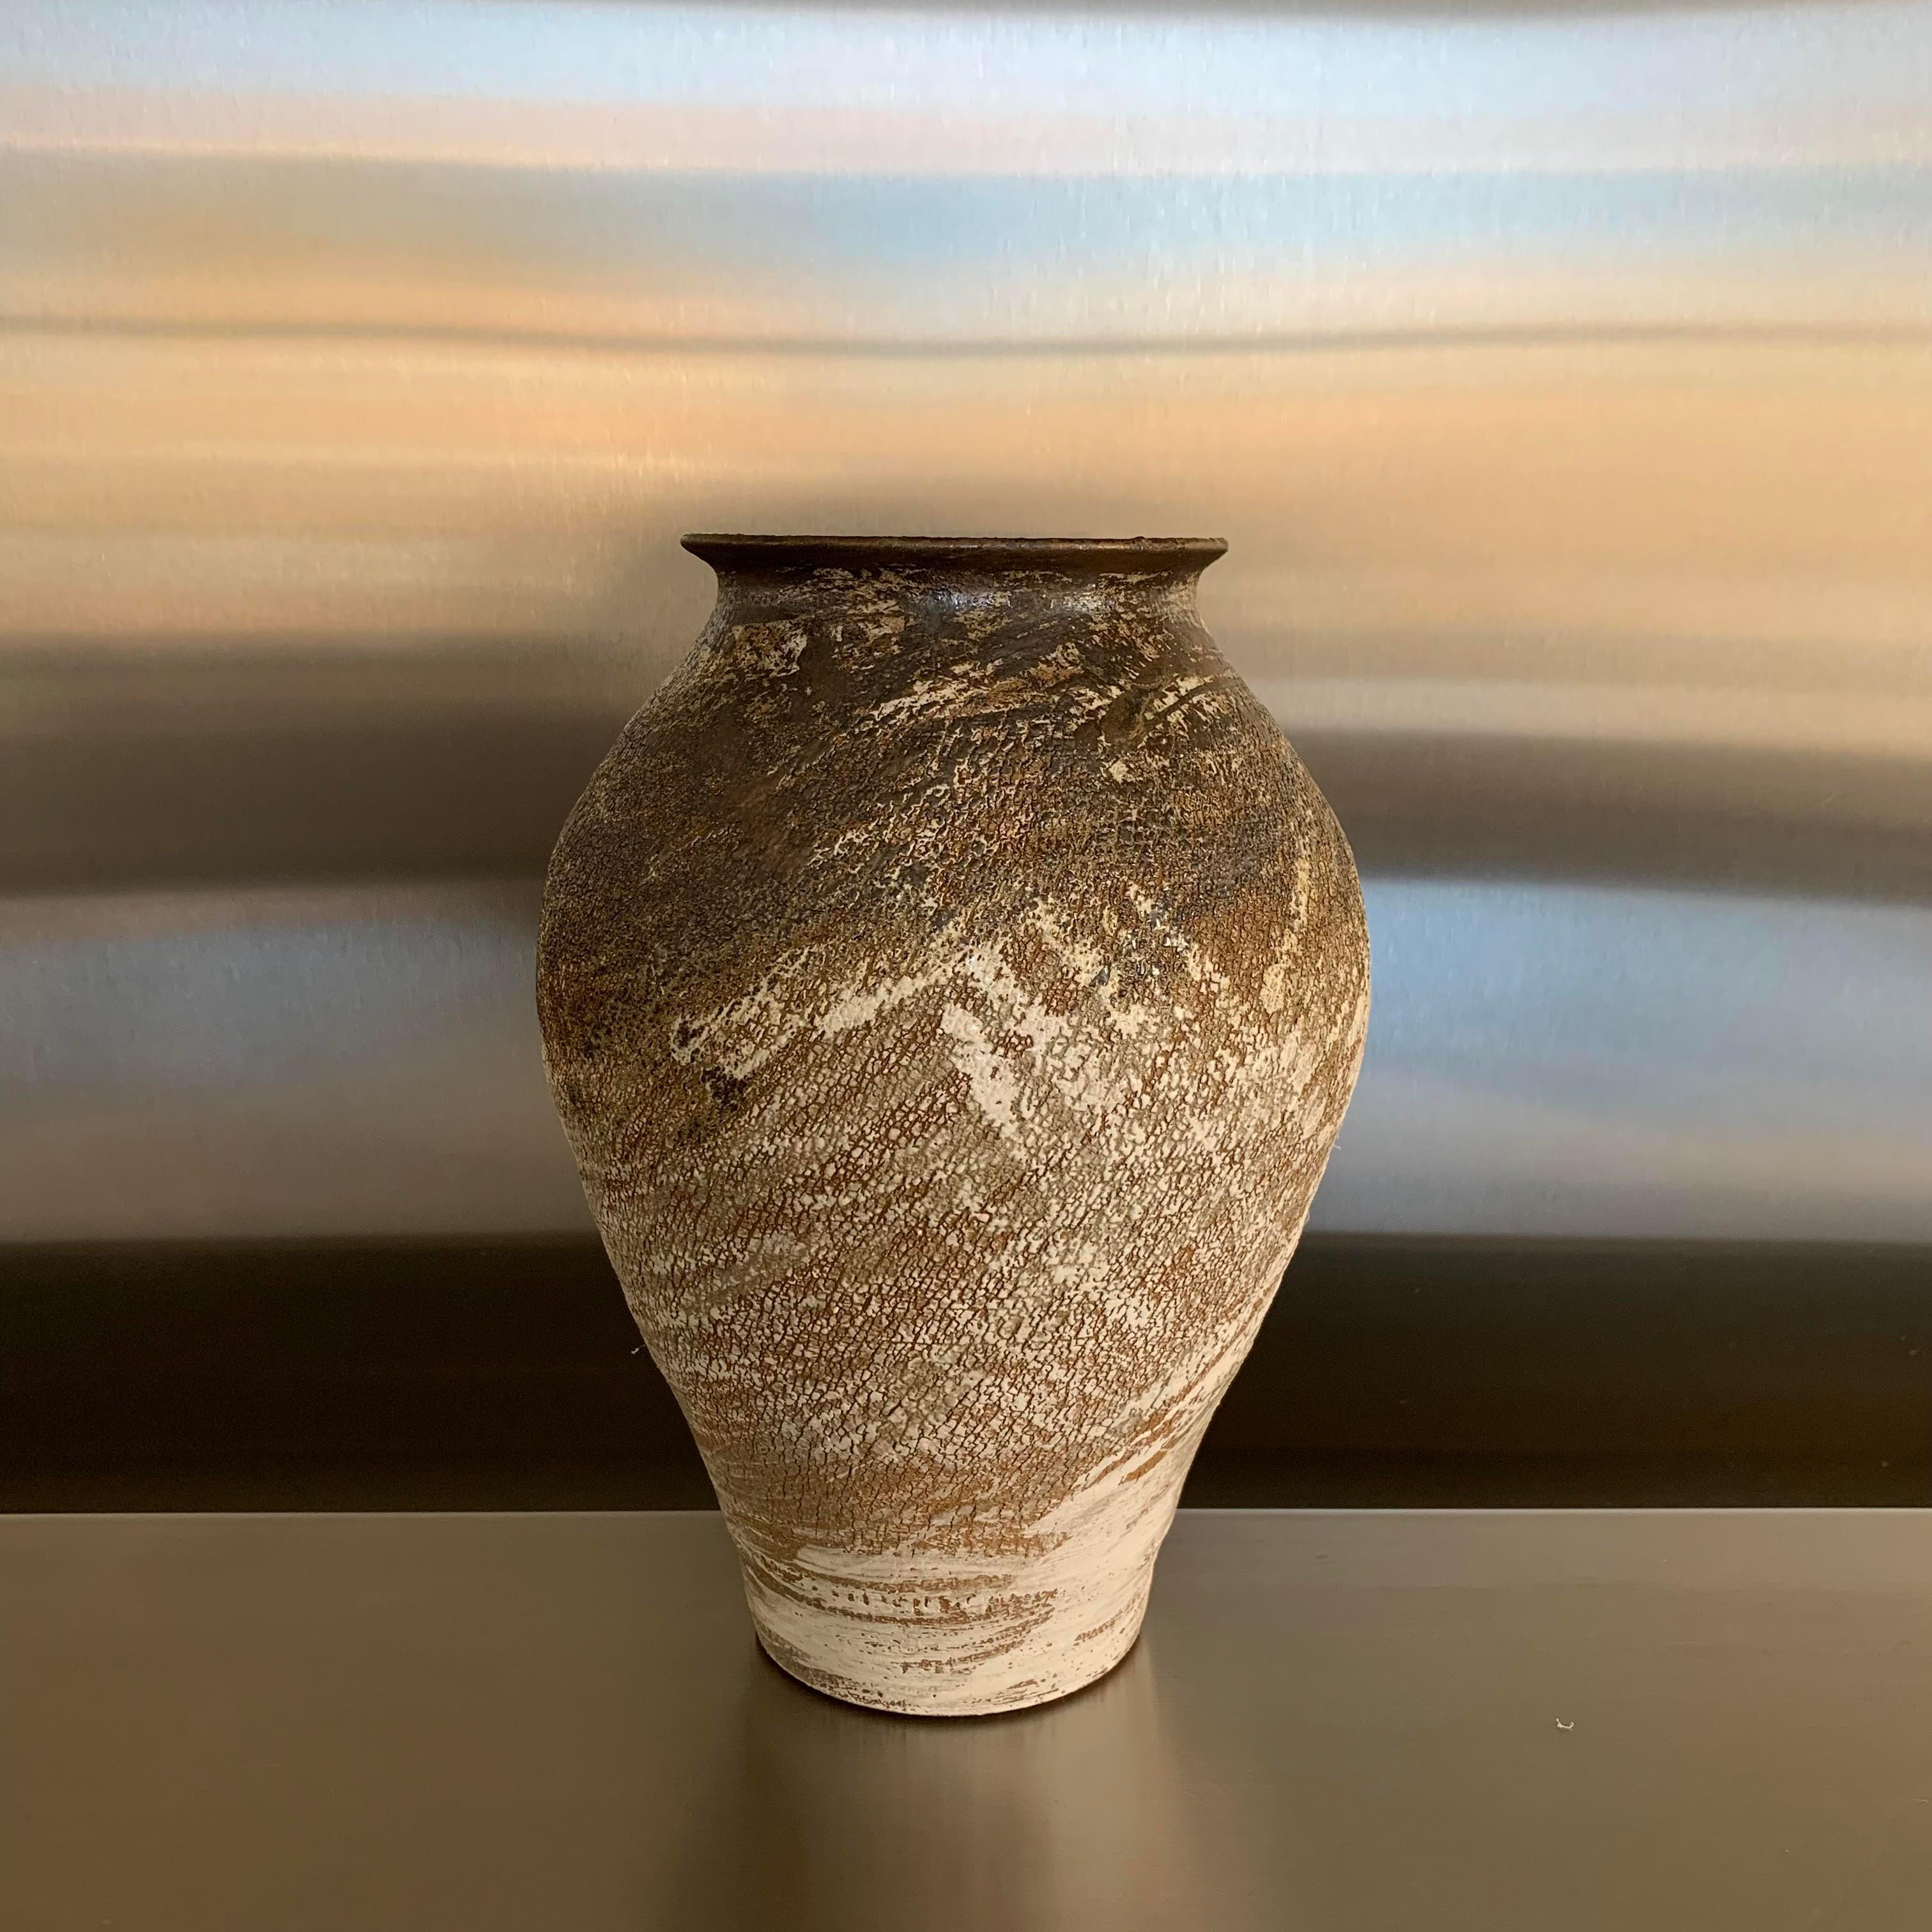 Contemporary American Ceramist Peter Speliopoulos stoneware vase.
The brown stoneware vessels are slipped in black and white, and then glazed with sweeping brushstrokes in various black, ivory and bronze glazes, to create an effect of erosion, as